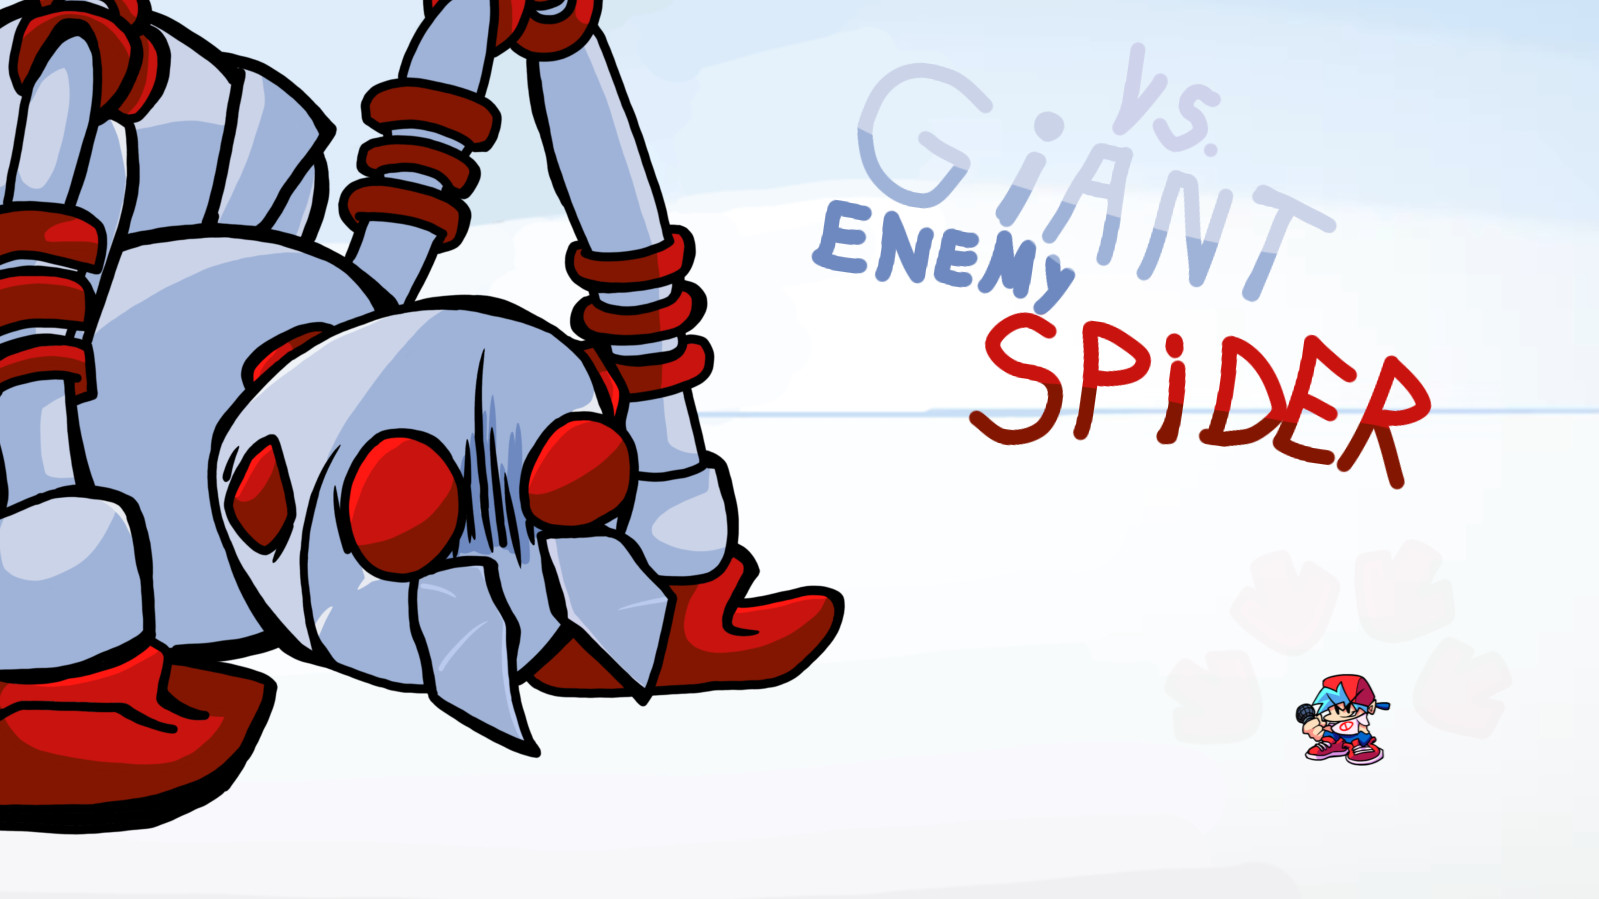 Fnf giant enemy spider